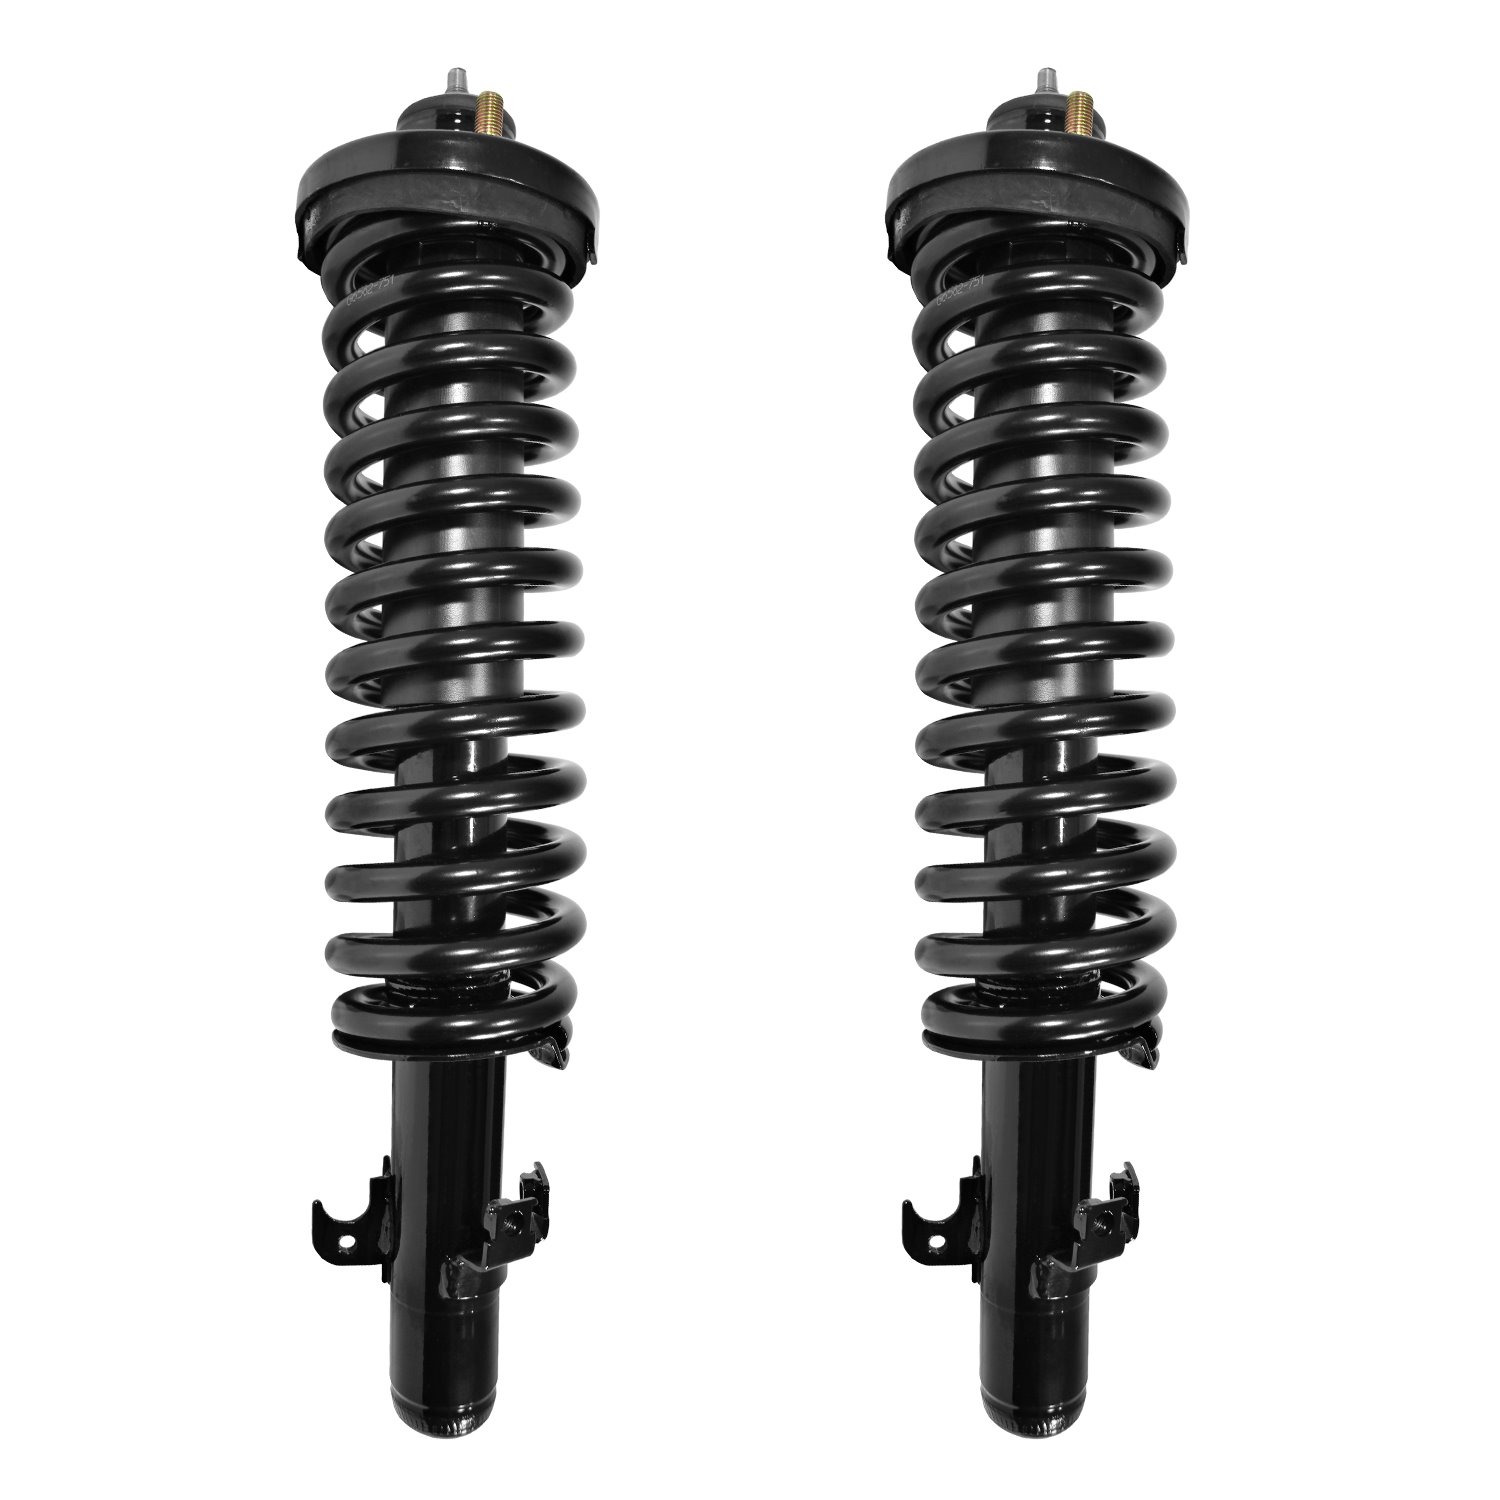 2-11400-001 Suspension Strut & Coil Spring Assembly Set Fits Select Honda Accord